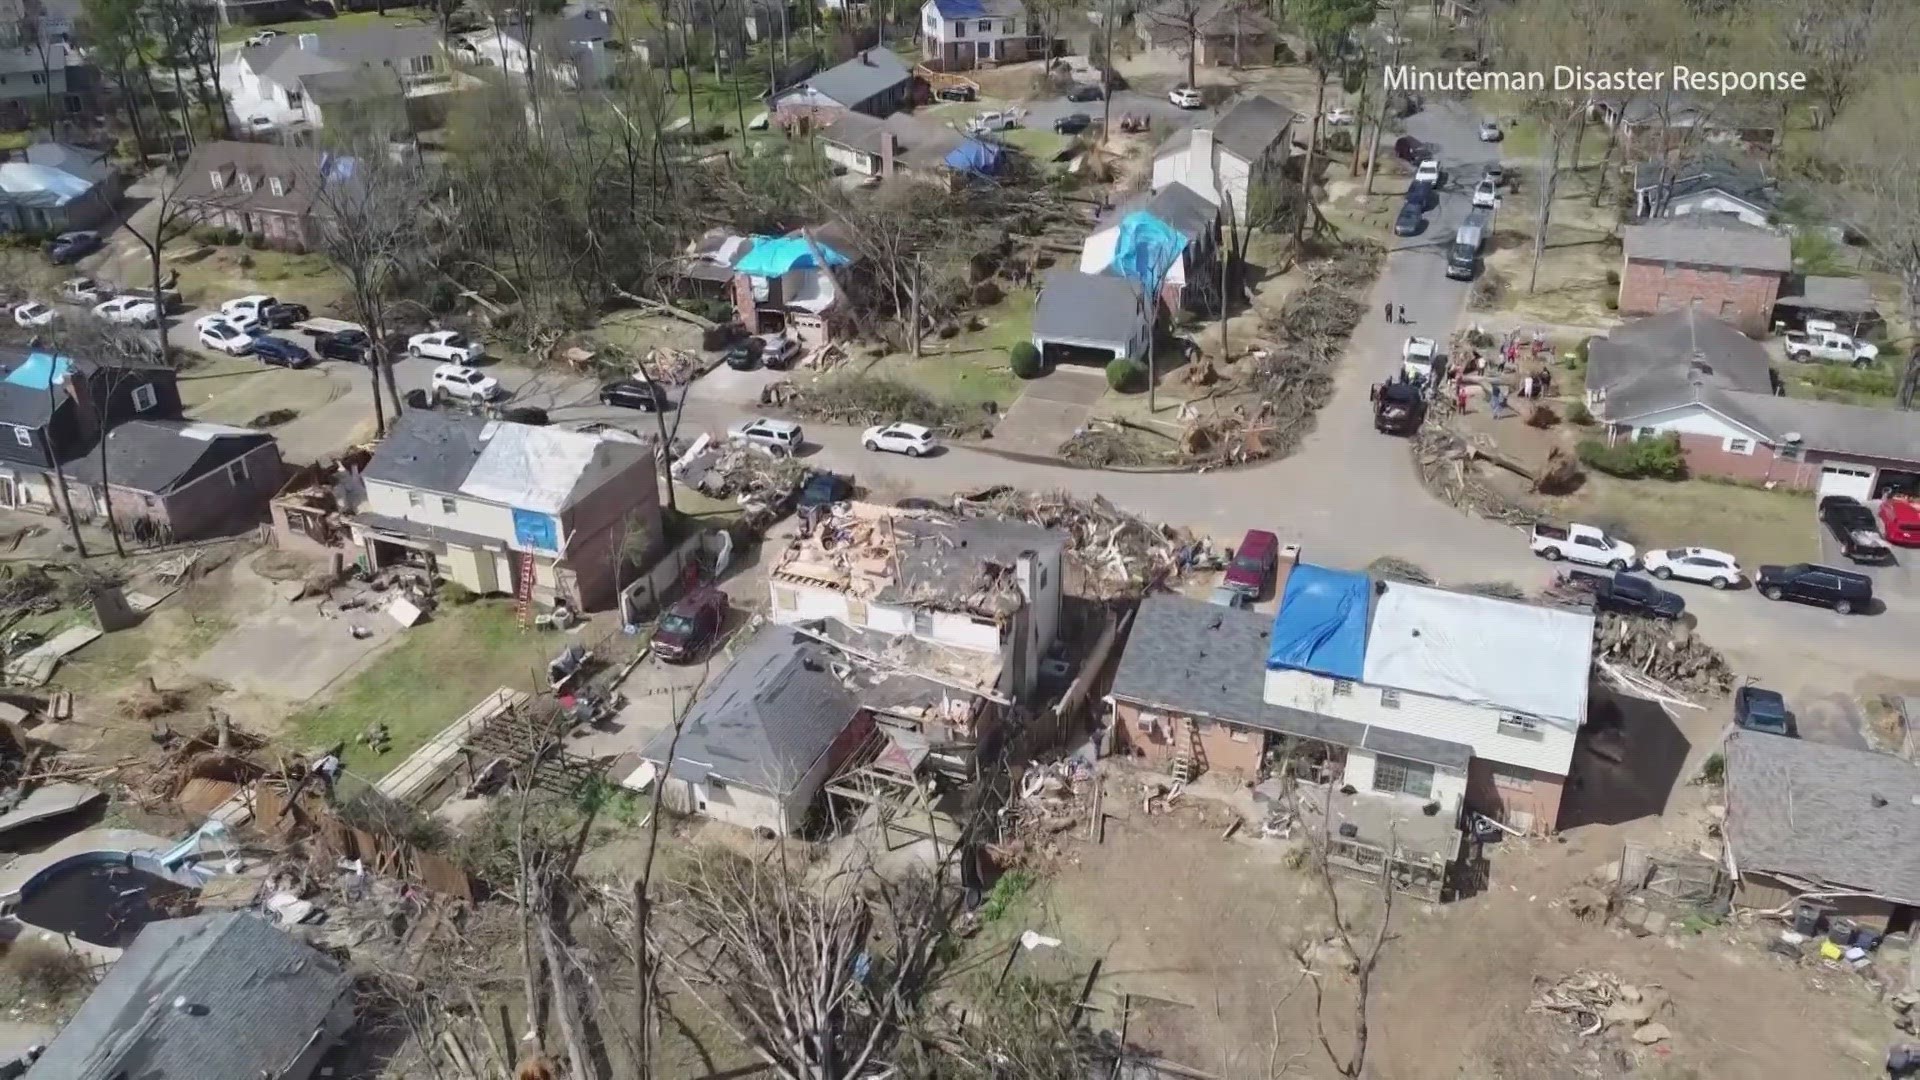 Crews with Minuteman Disaster Response went to Little Rock, Arkansas after devastating storms ripped through the area.